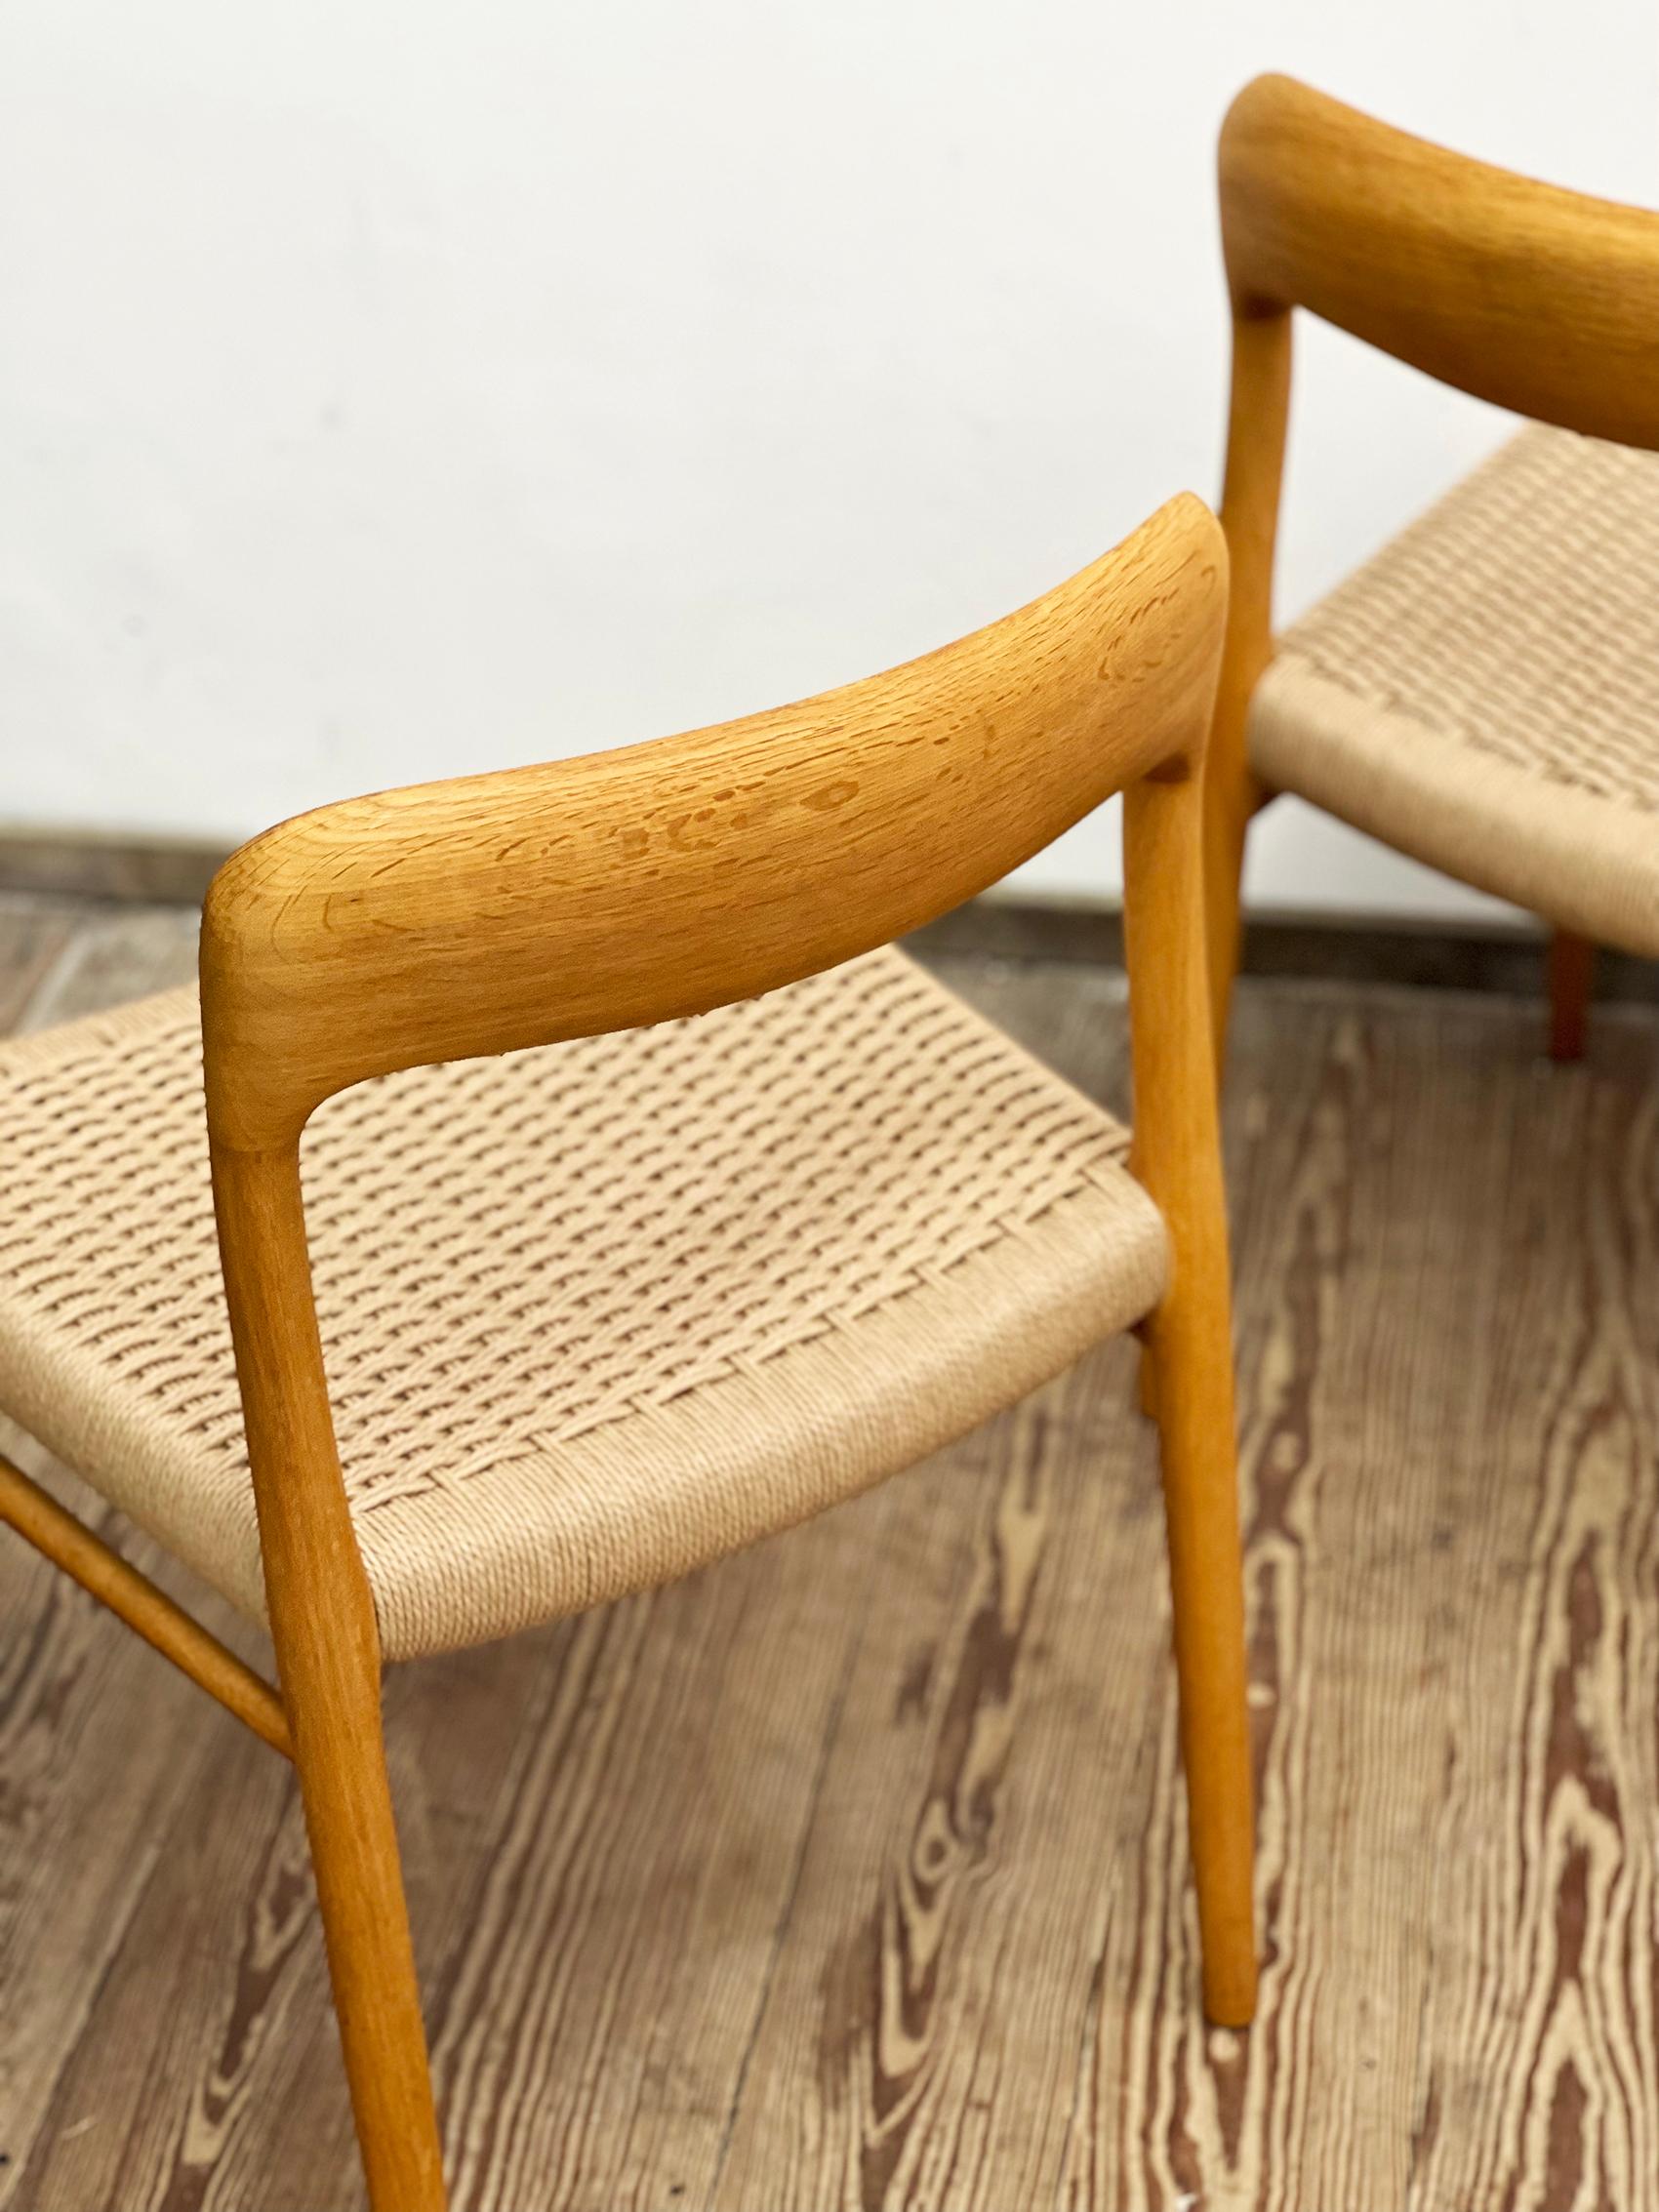 Mid-20th Century Pair of Mid-Century Oak Dining Chairs #75, Niels O. Møller for J. L. Moller For Sale